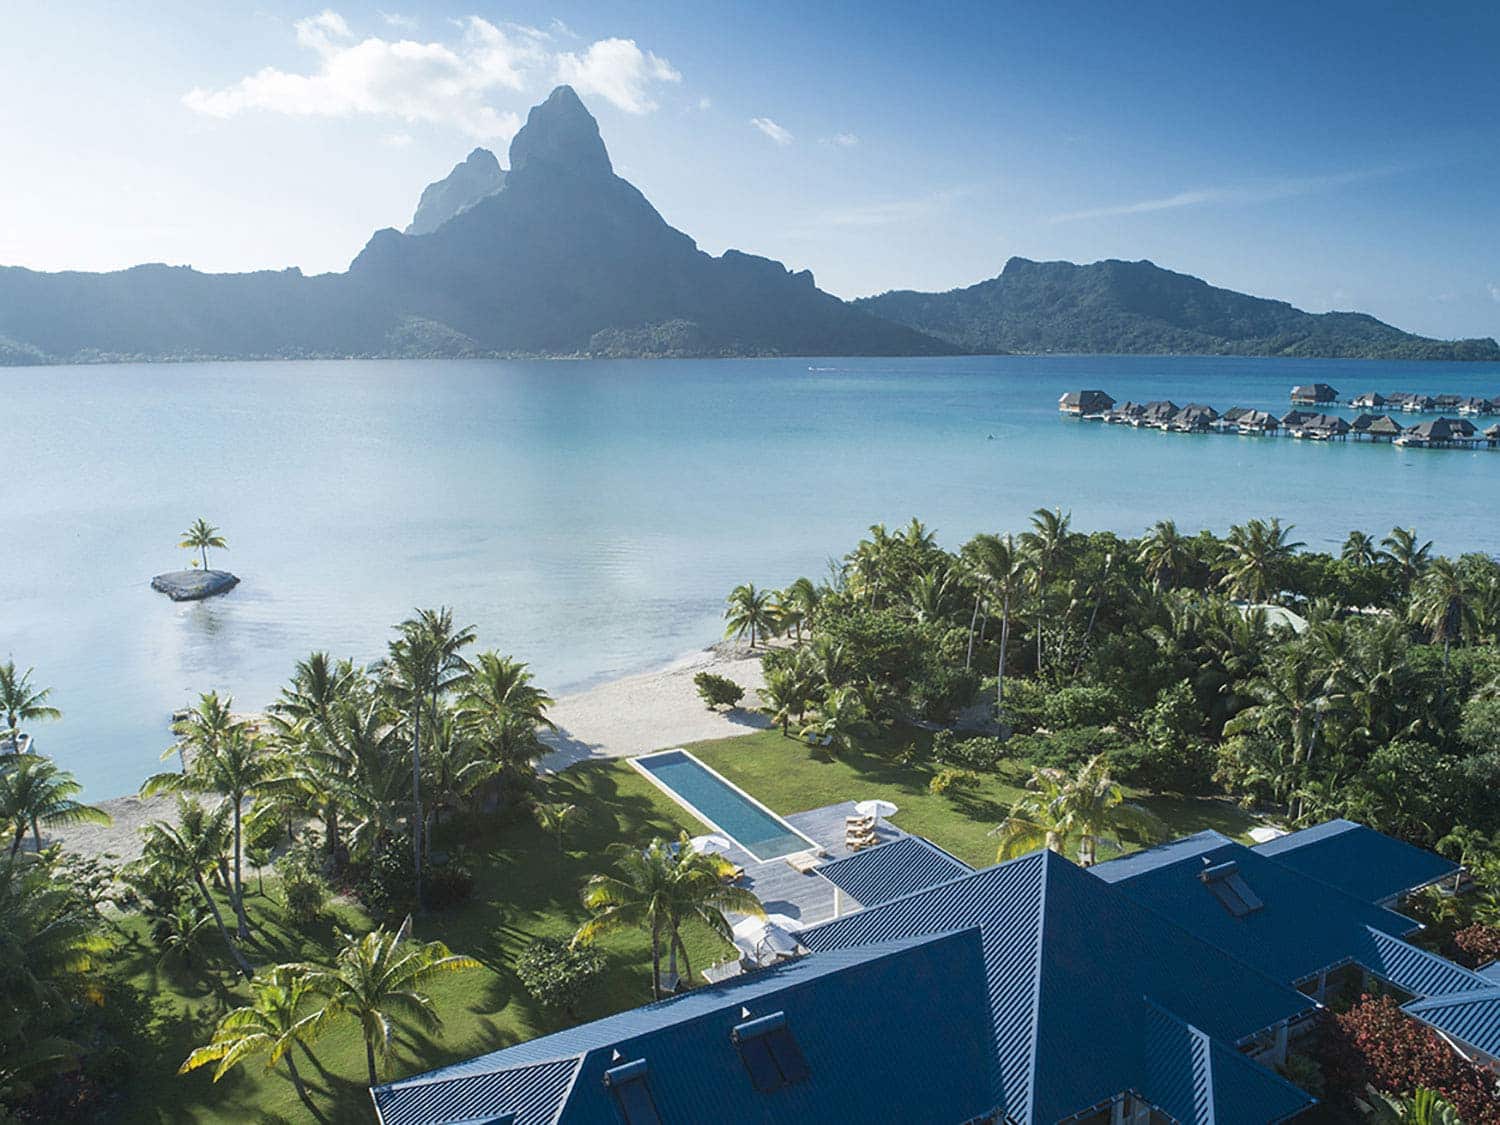 An aerial view of Bora Bora One resort overlooking the ocean and a mountainous island in the distance.